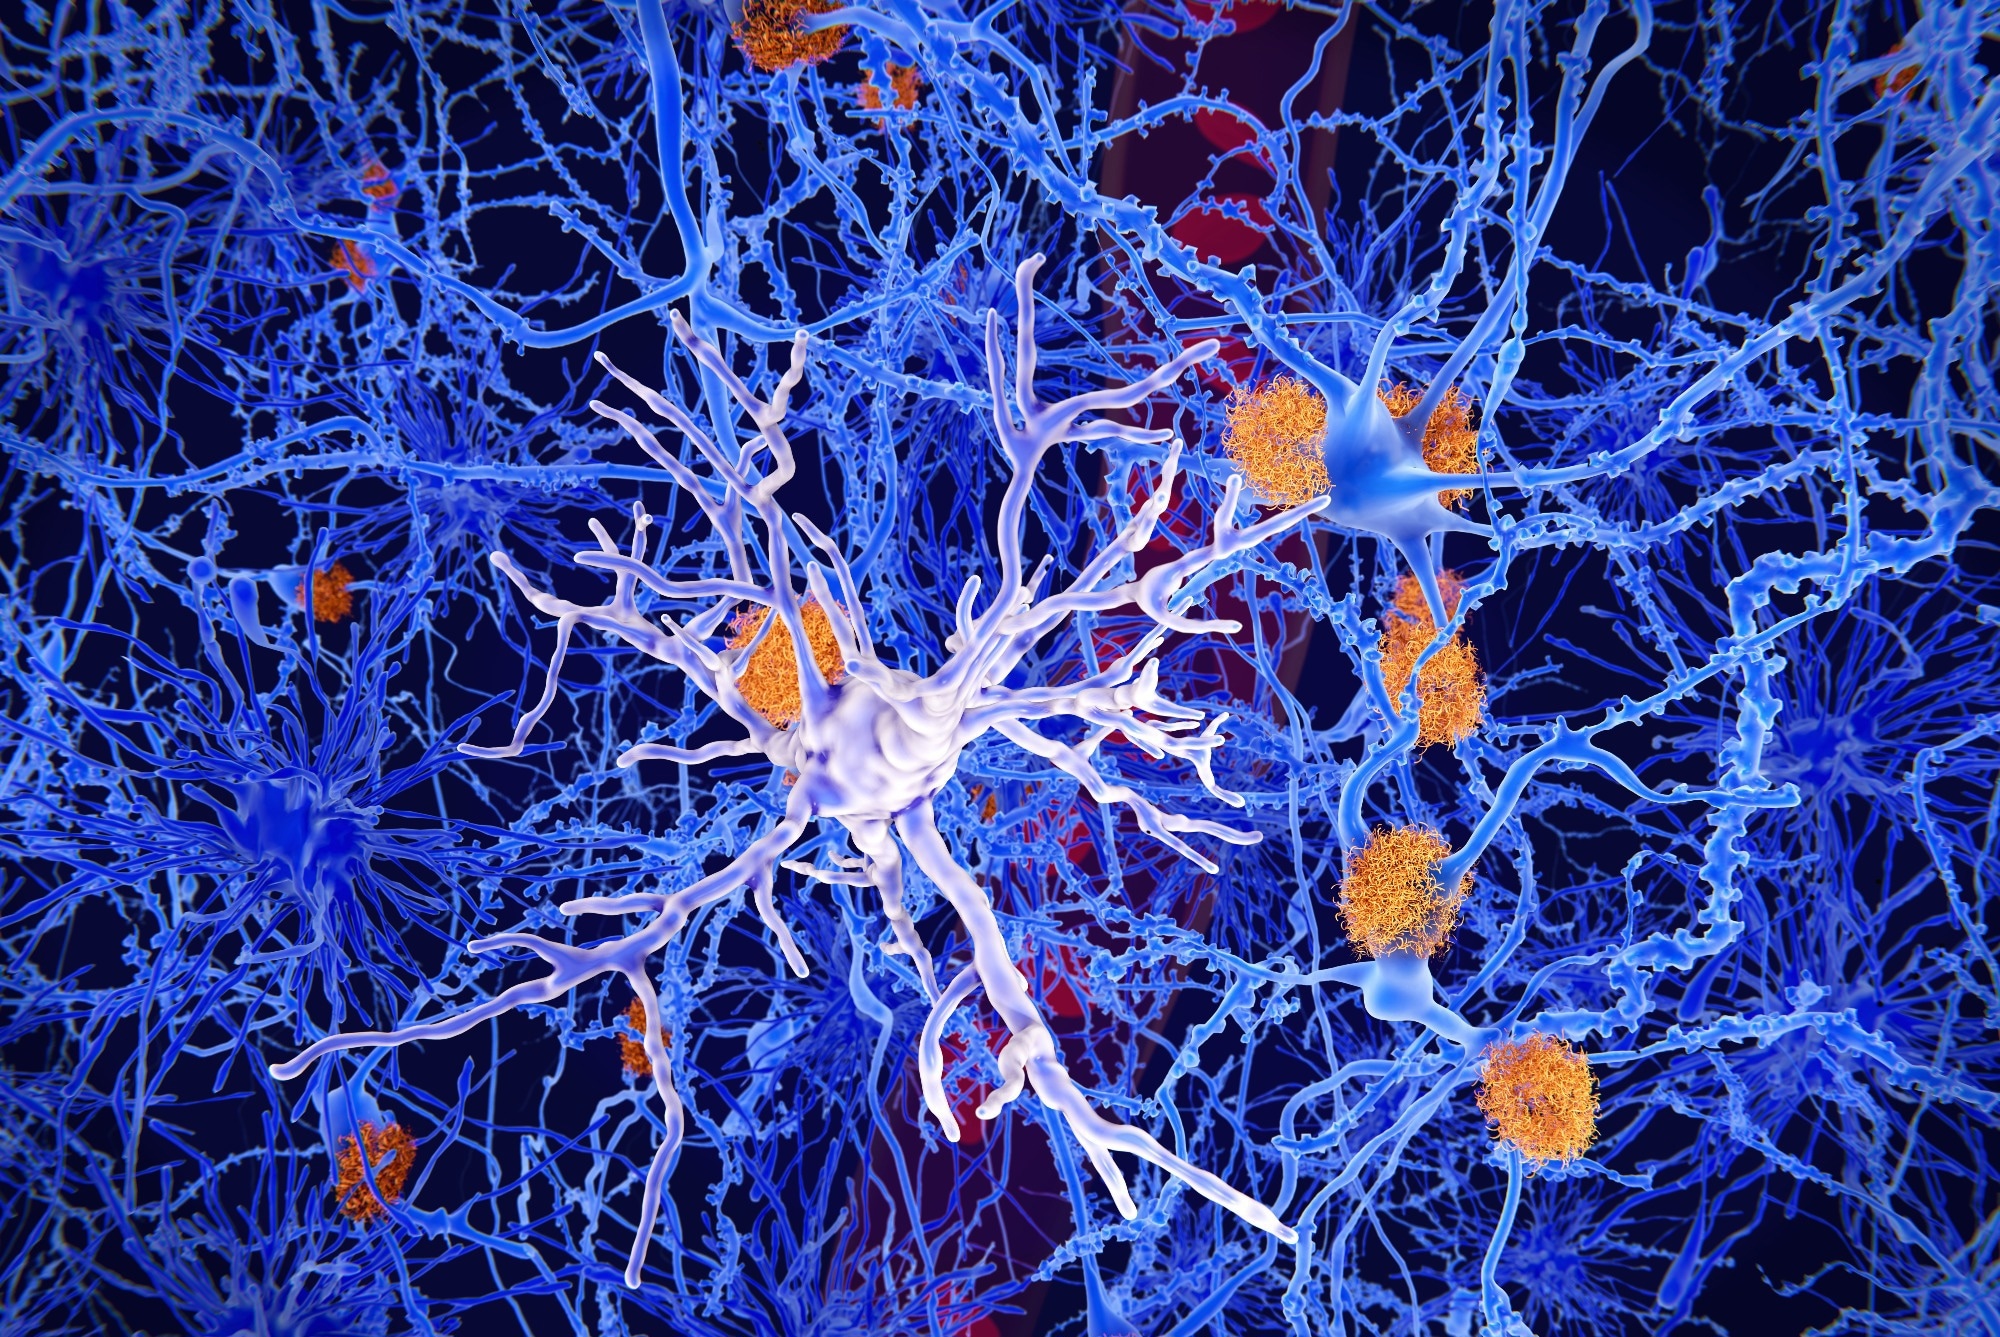 Study: Highly Accurate Blood Test for Alzheimer’s Disease Comparable or Superior to Clinical CSF Tests. Image Credit: Juan Gaertner / Shutterstock